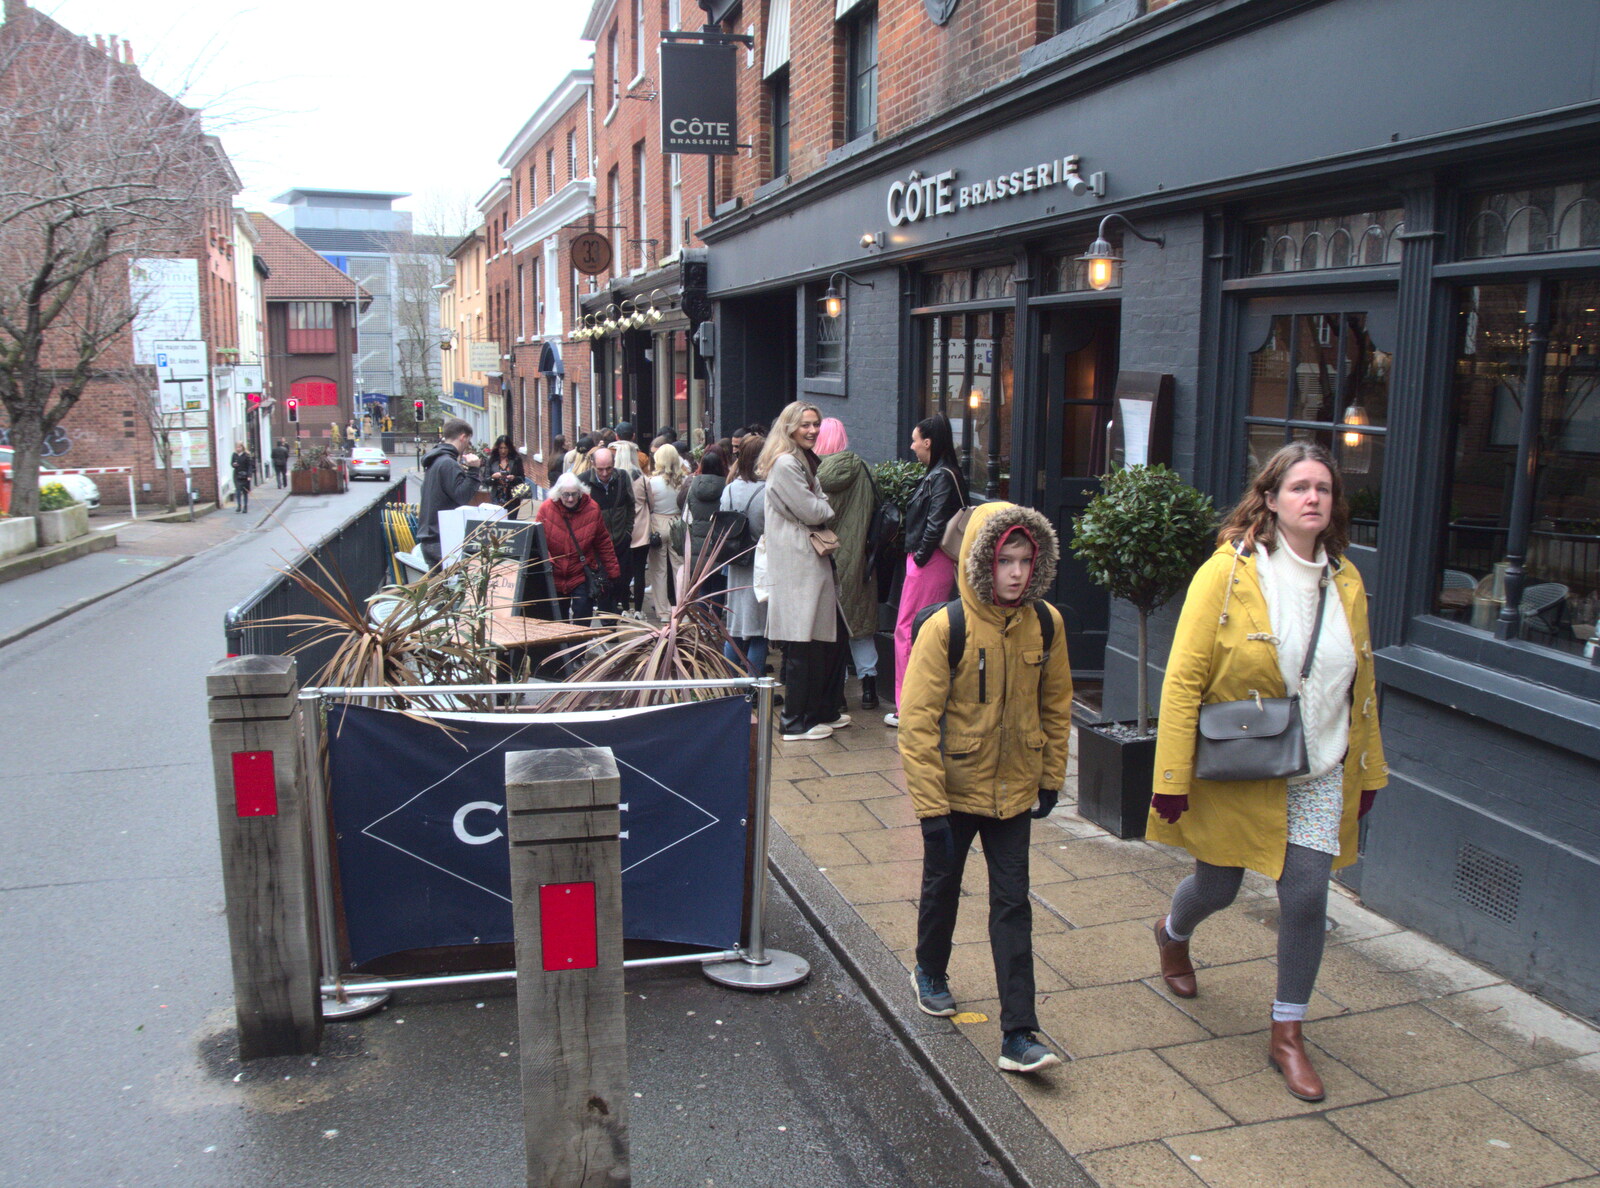 There's a big queue for a café on Exchange Street from It's a Stitch Up: A Trip to Norwich, Norfolk - 18th March 2023